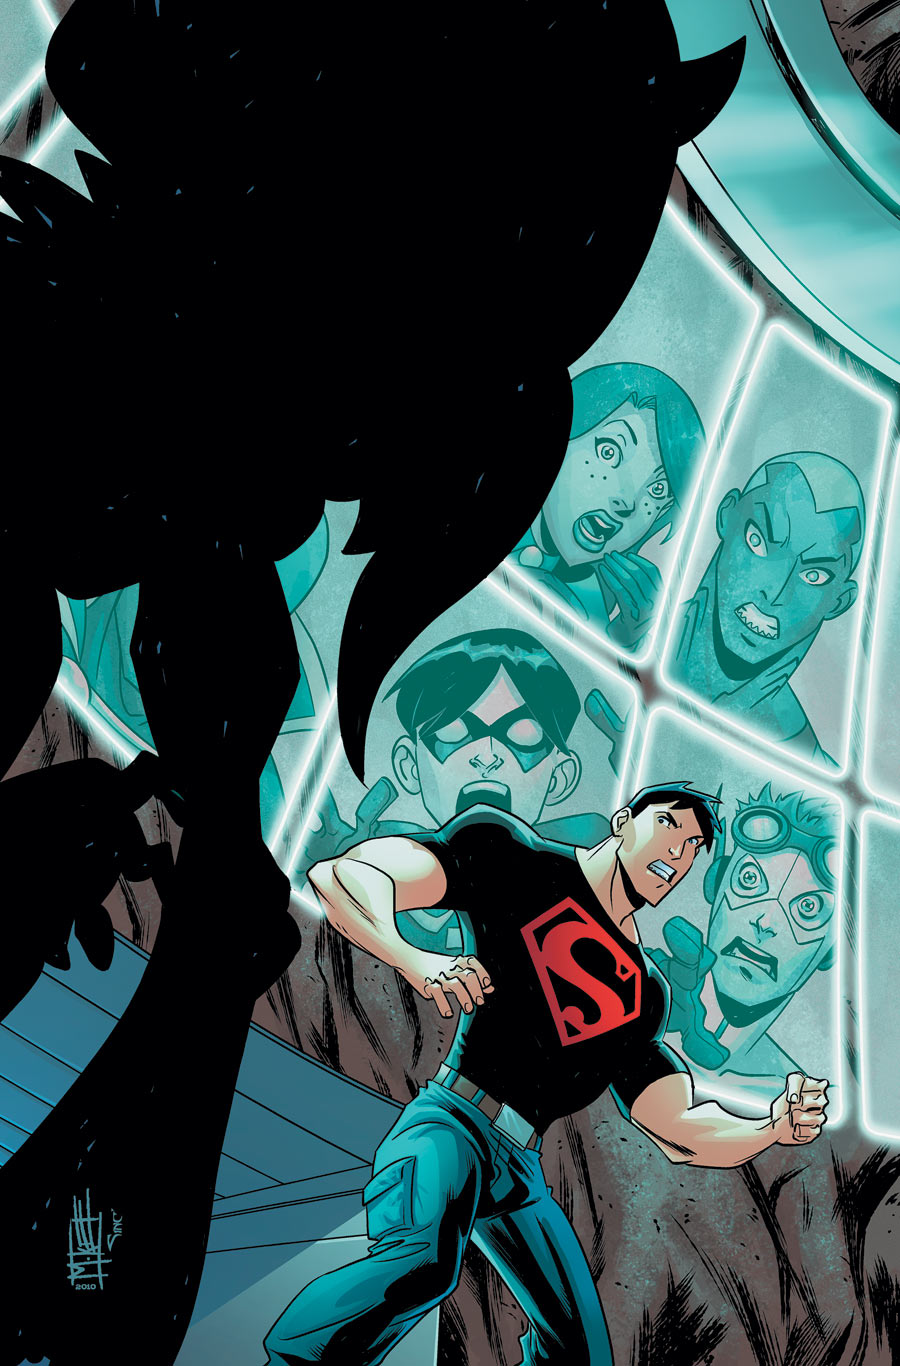 YOUNG JUSTICE #1